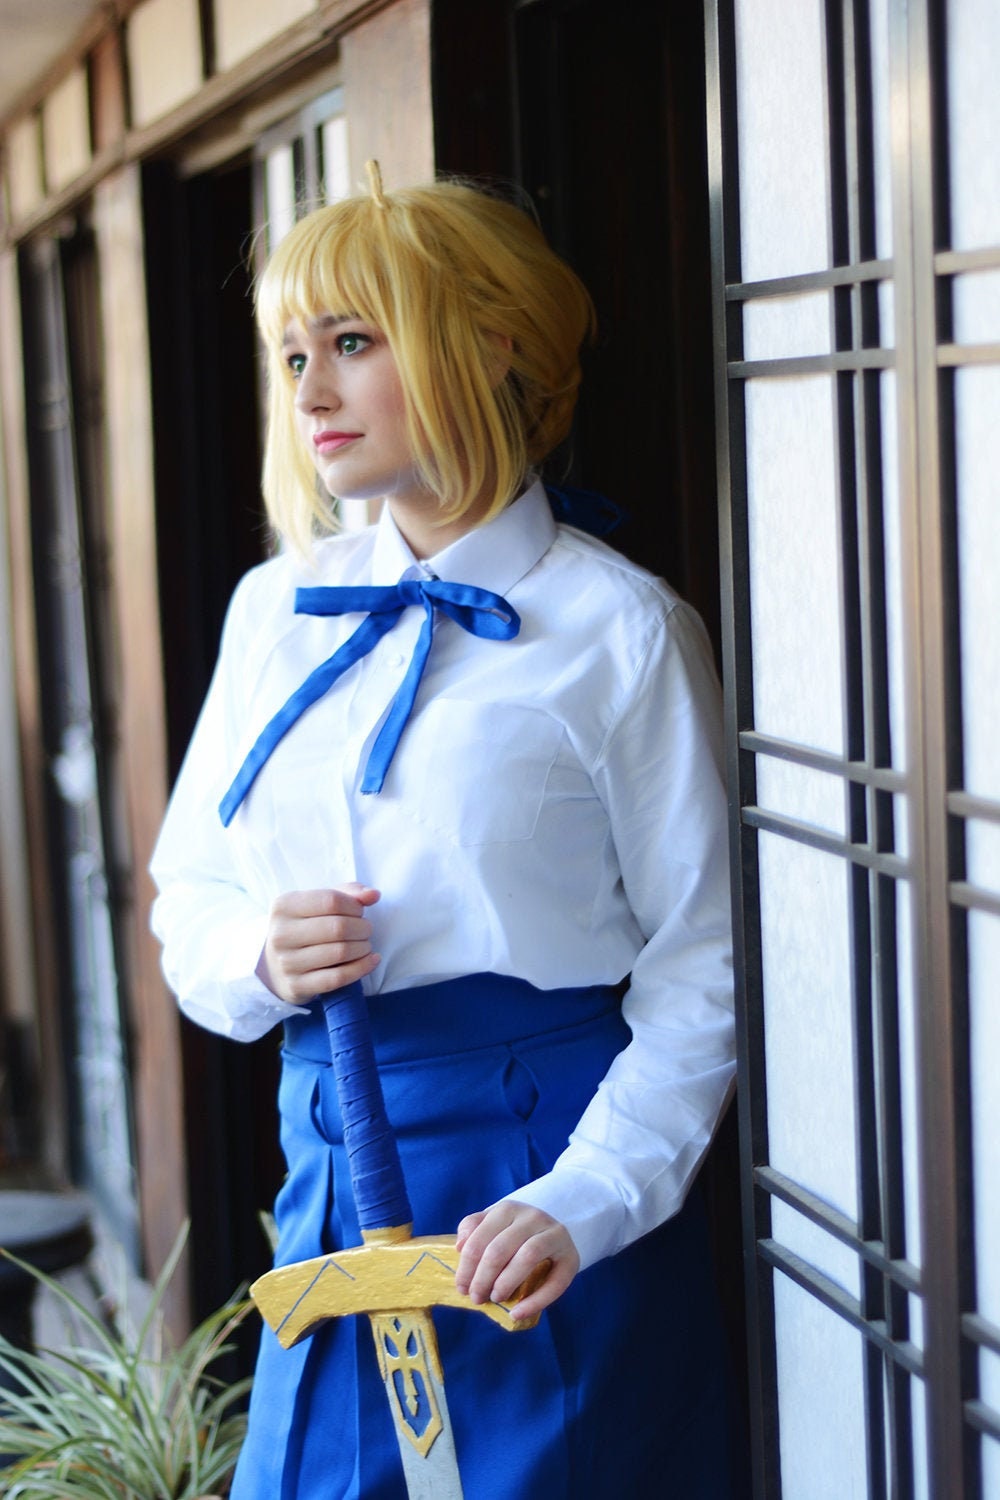 Saber Fate Stay Night A5 Cosplay Print | Etsy